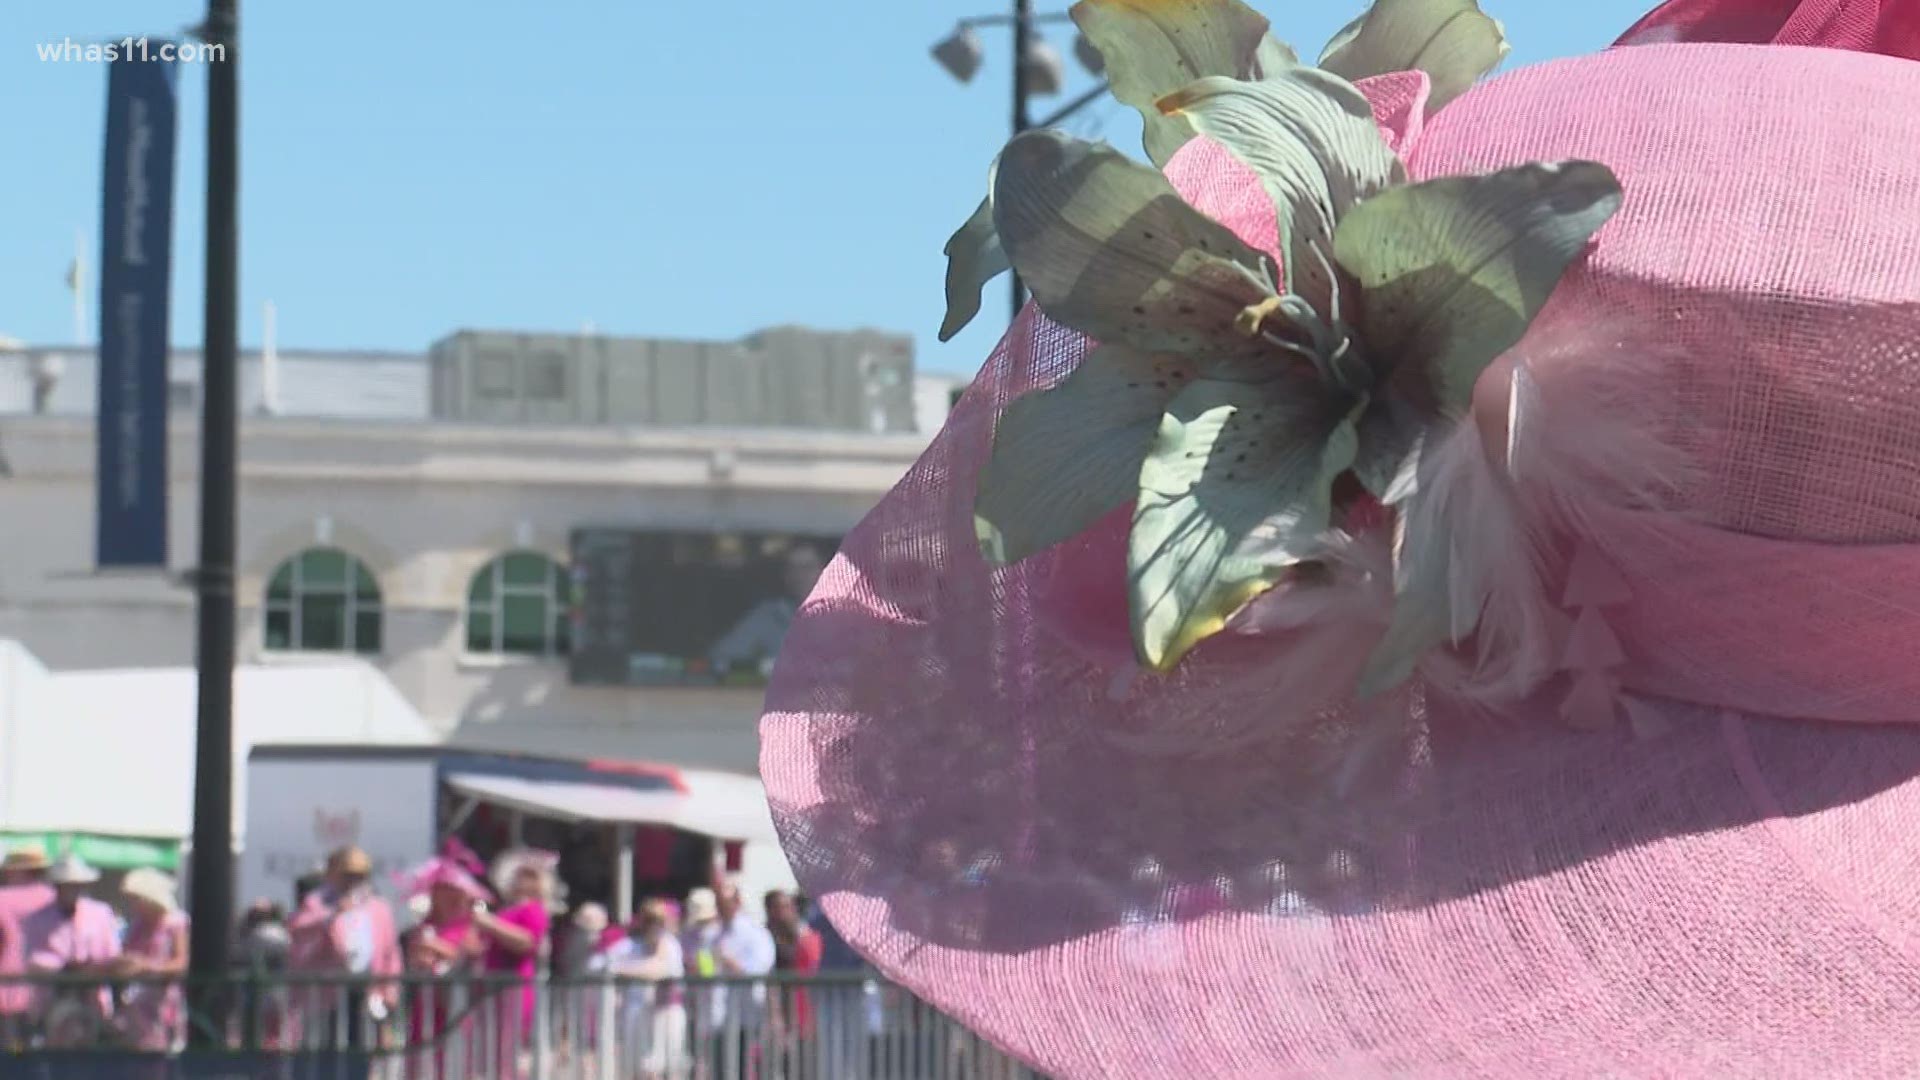 The official attendance for the return of fans to the Kentucky Oaks was 41,472.